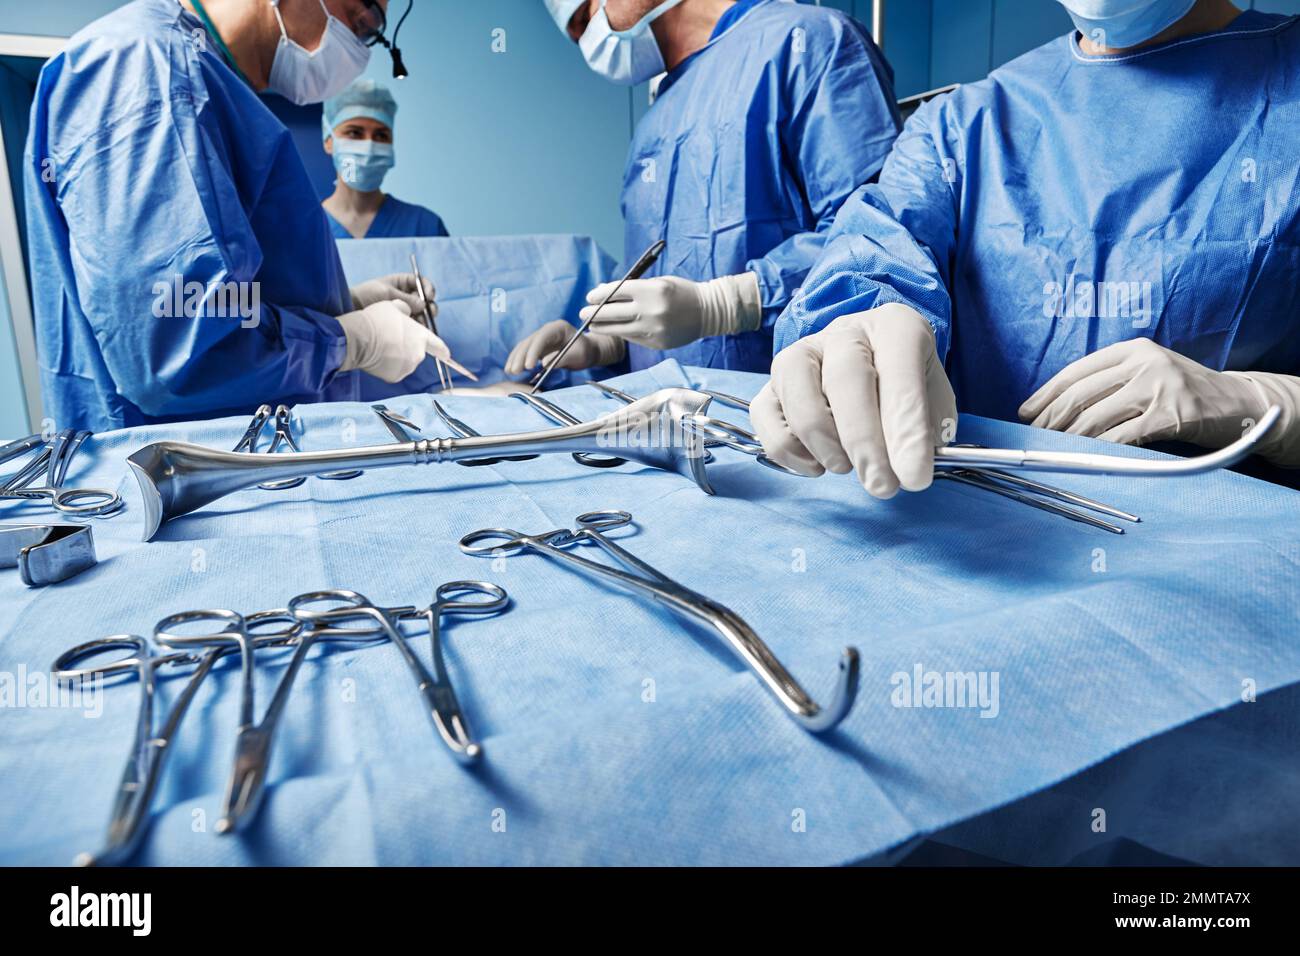 Surgical Team. Surgical nurse giving surgical scissors to male surgeon during operation in operating theatre Stock Photo